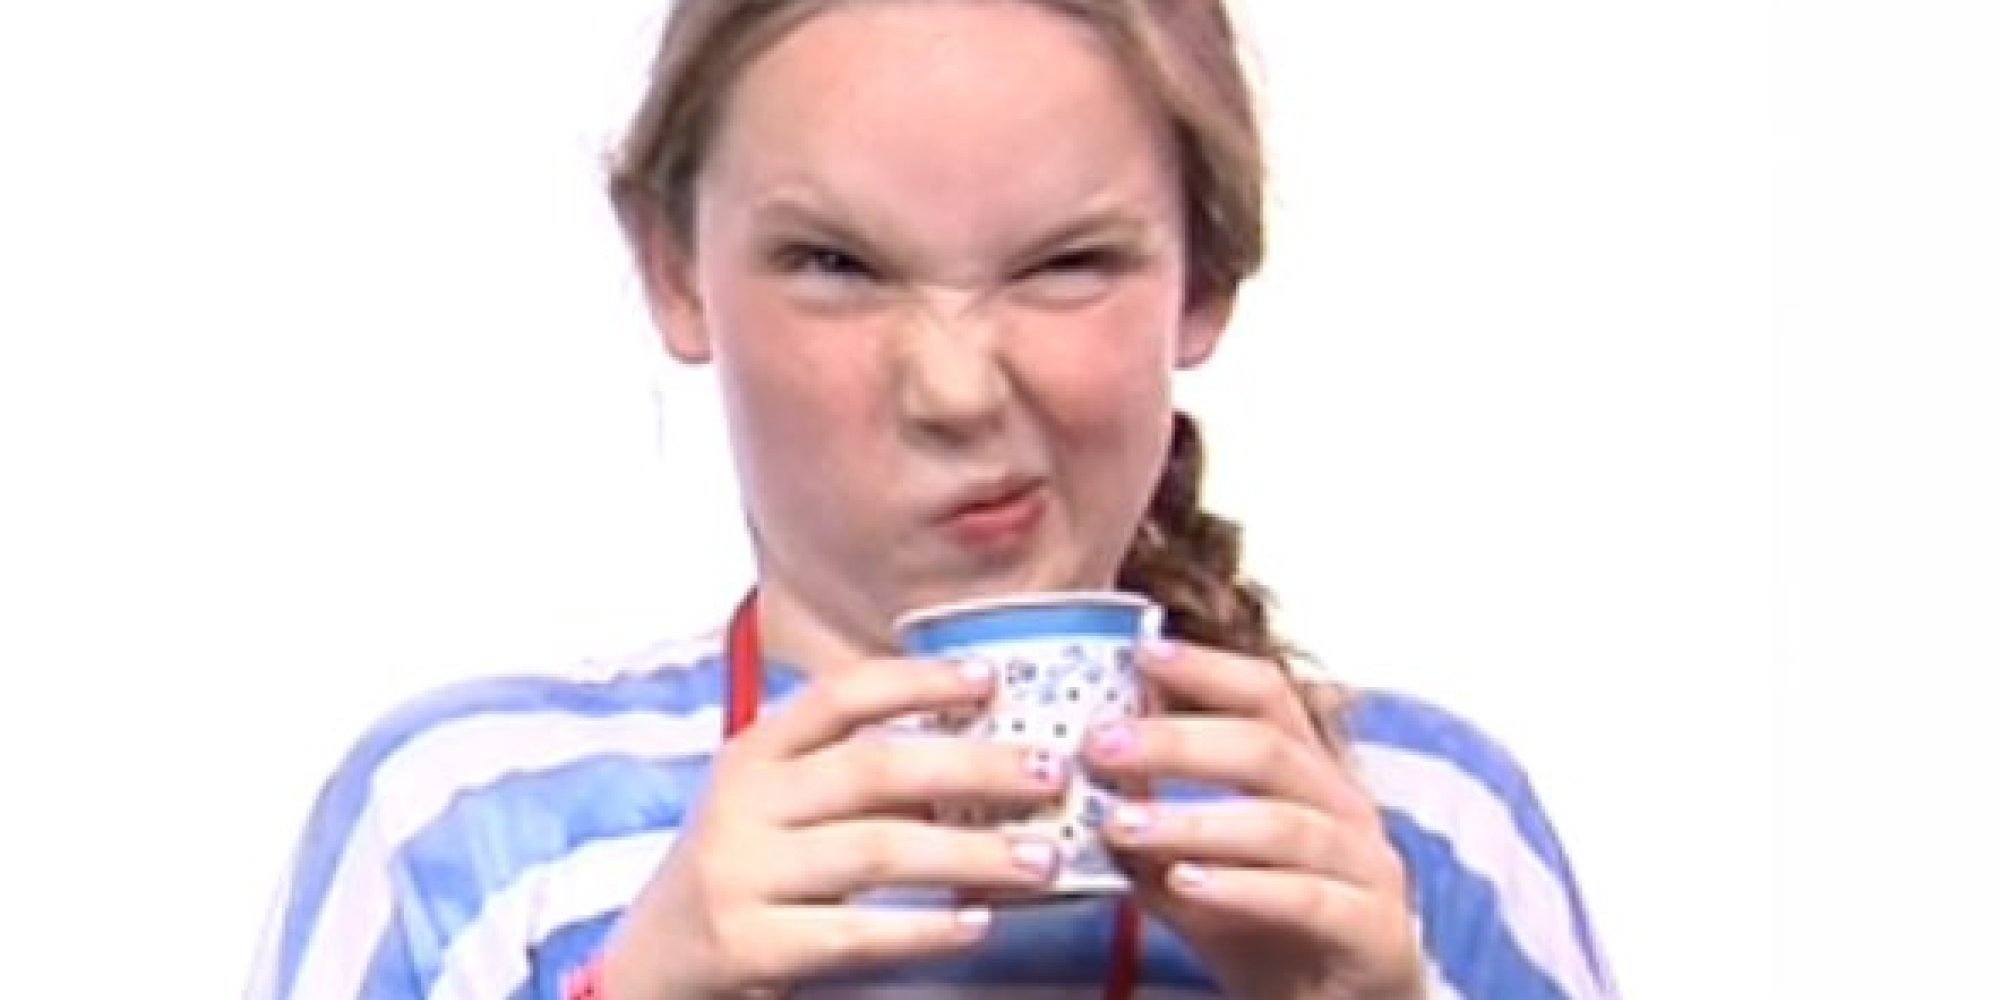 This Video Of Kids Tasting Coffee For The First Time Will Make Your Day